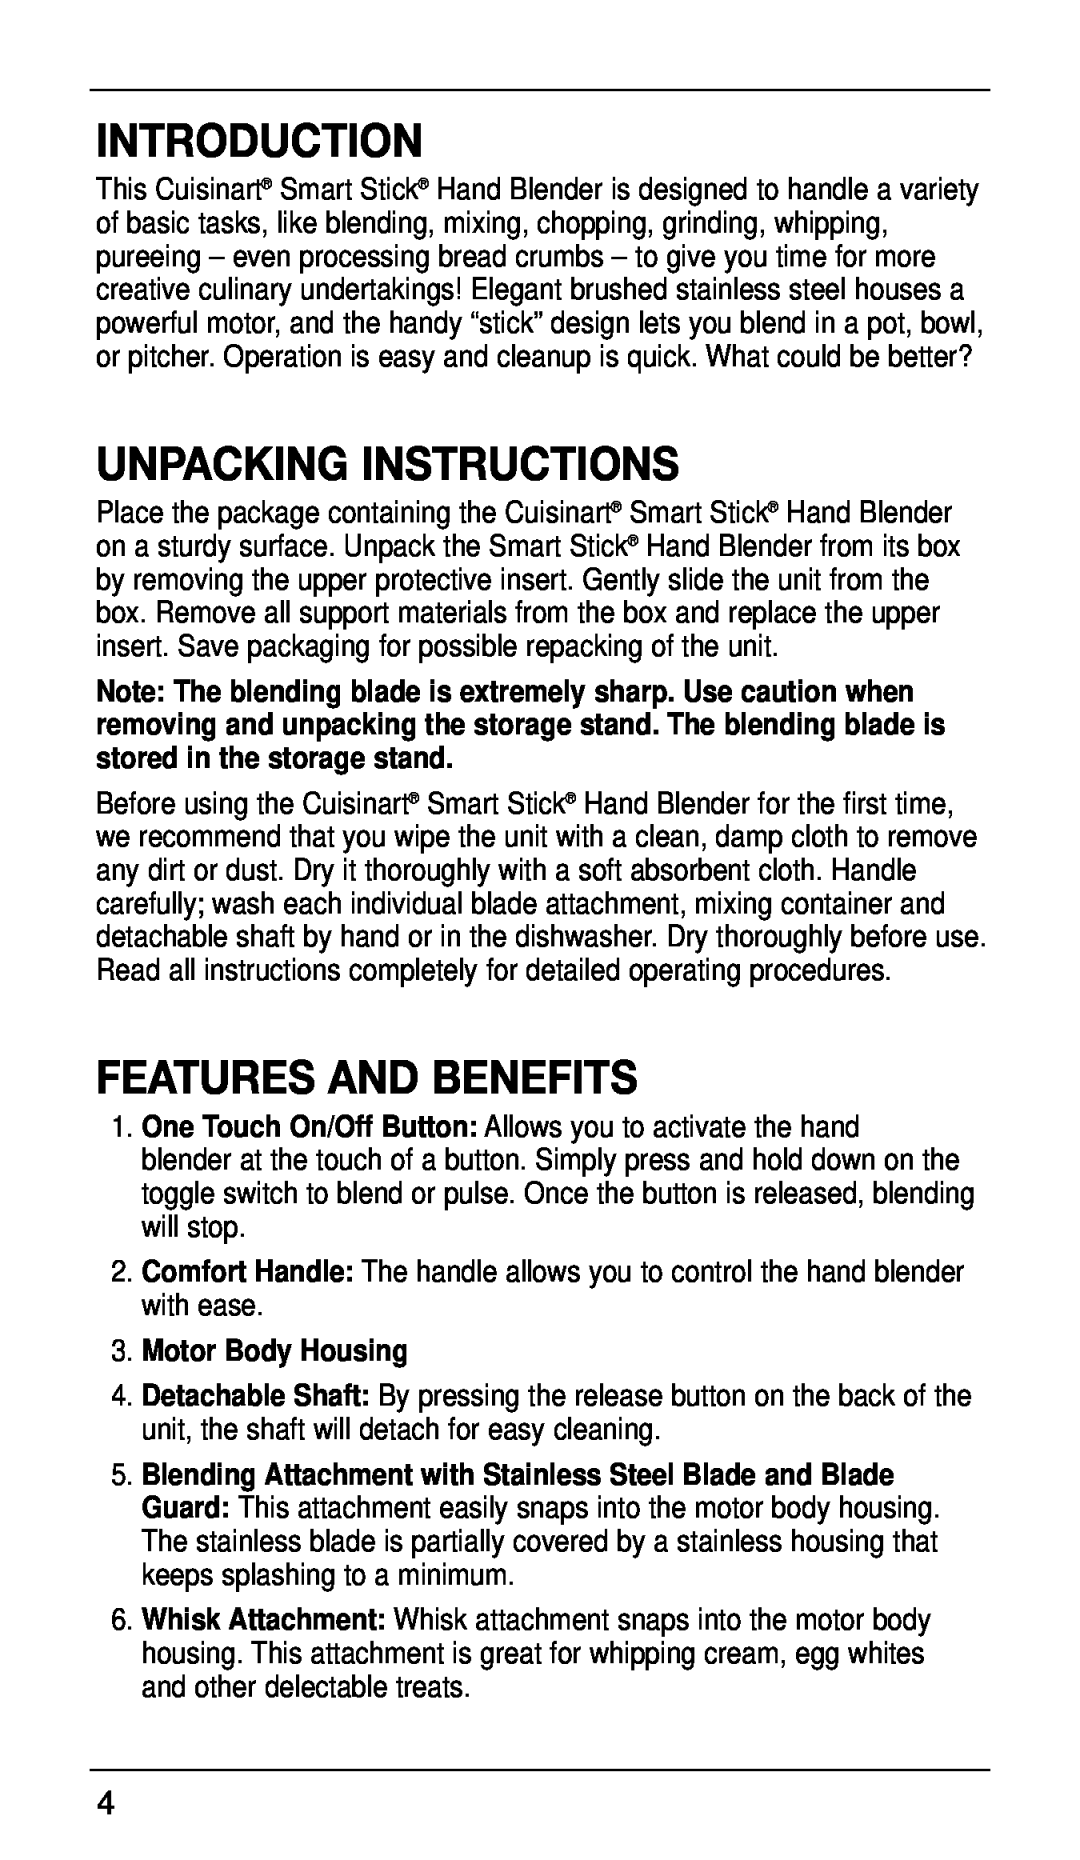 Cuisinart CSB-77 manual Introduction, Unpacking Instructions, Features And Benefits, Motor Body Housing 